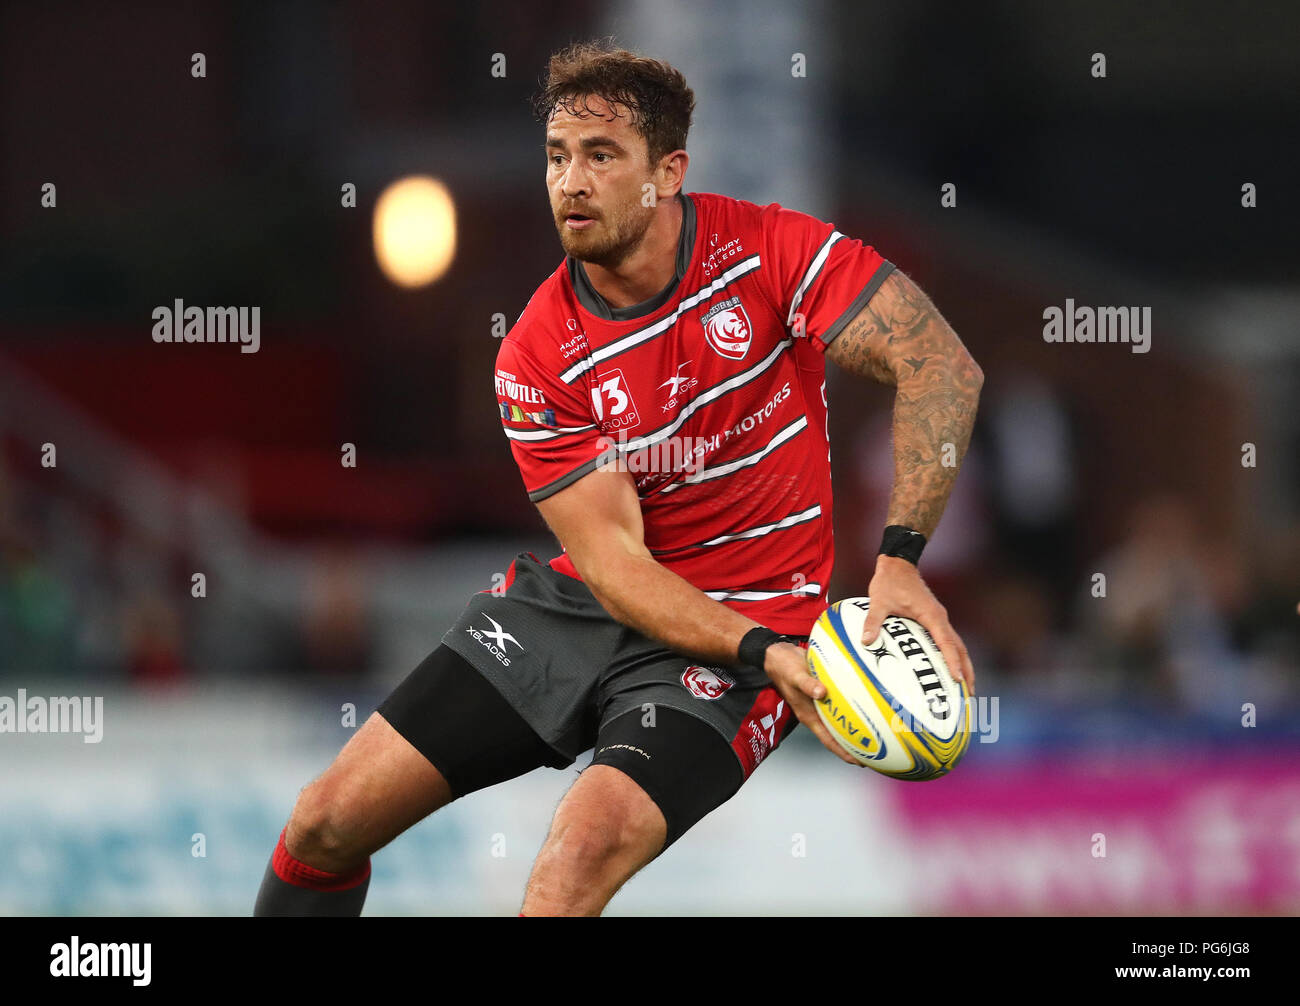 Gloucester's Danny Cipriani during the pre-season friendly match at Kingsholm Stadium, Gloucester. Stock Photo